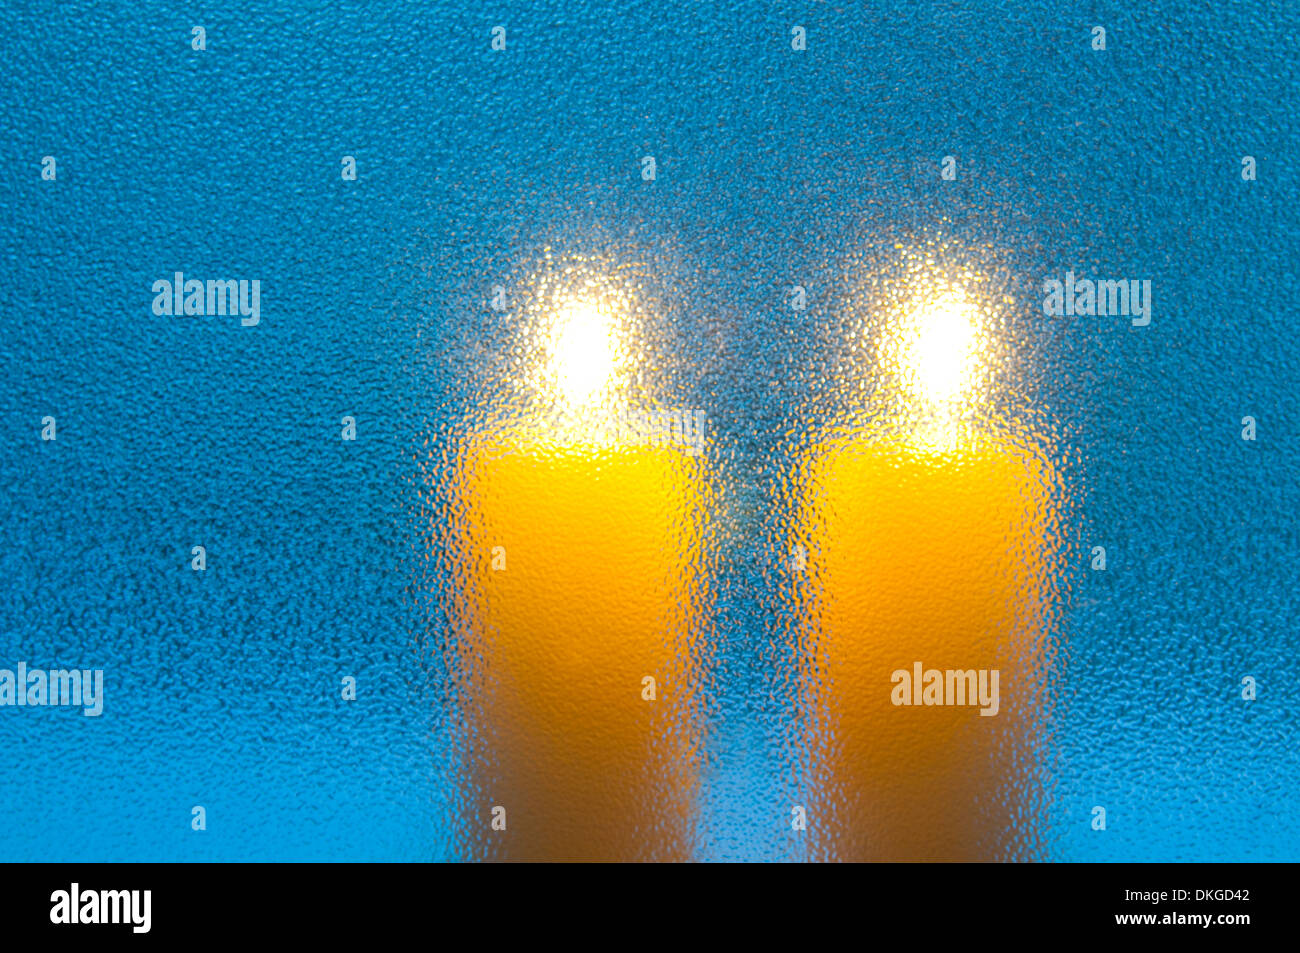 Two lit up candles viewed through a frosted glass. Stock Photo